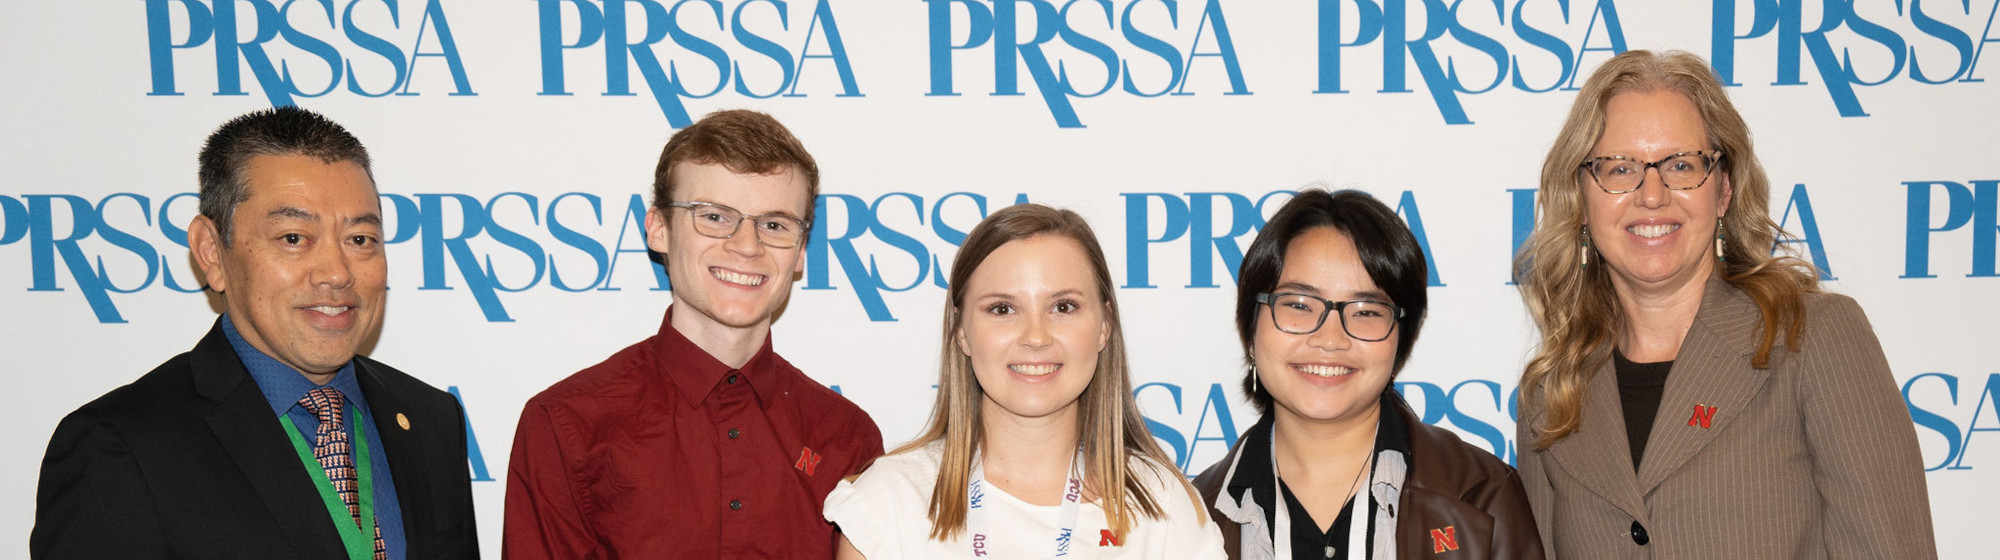 PRSSA Competition Students